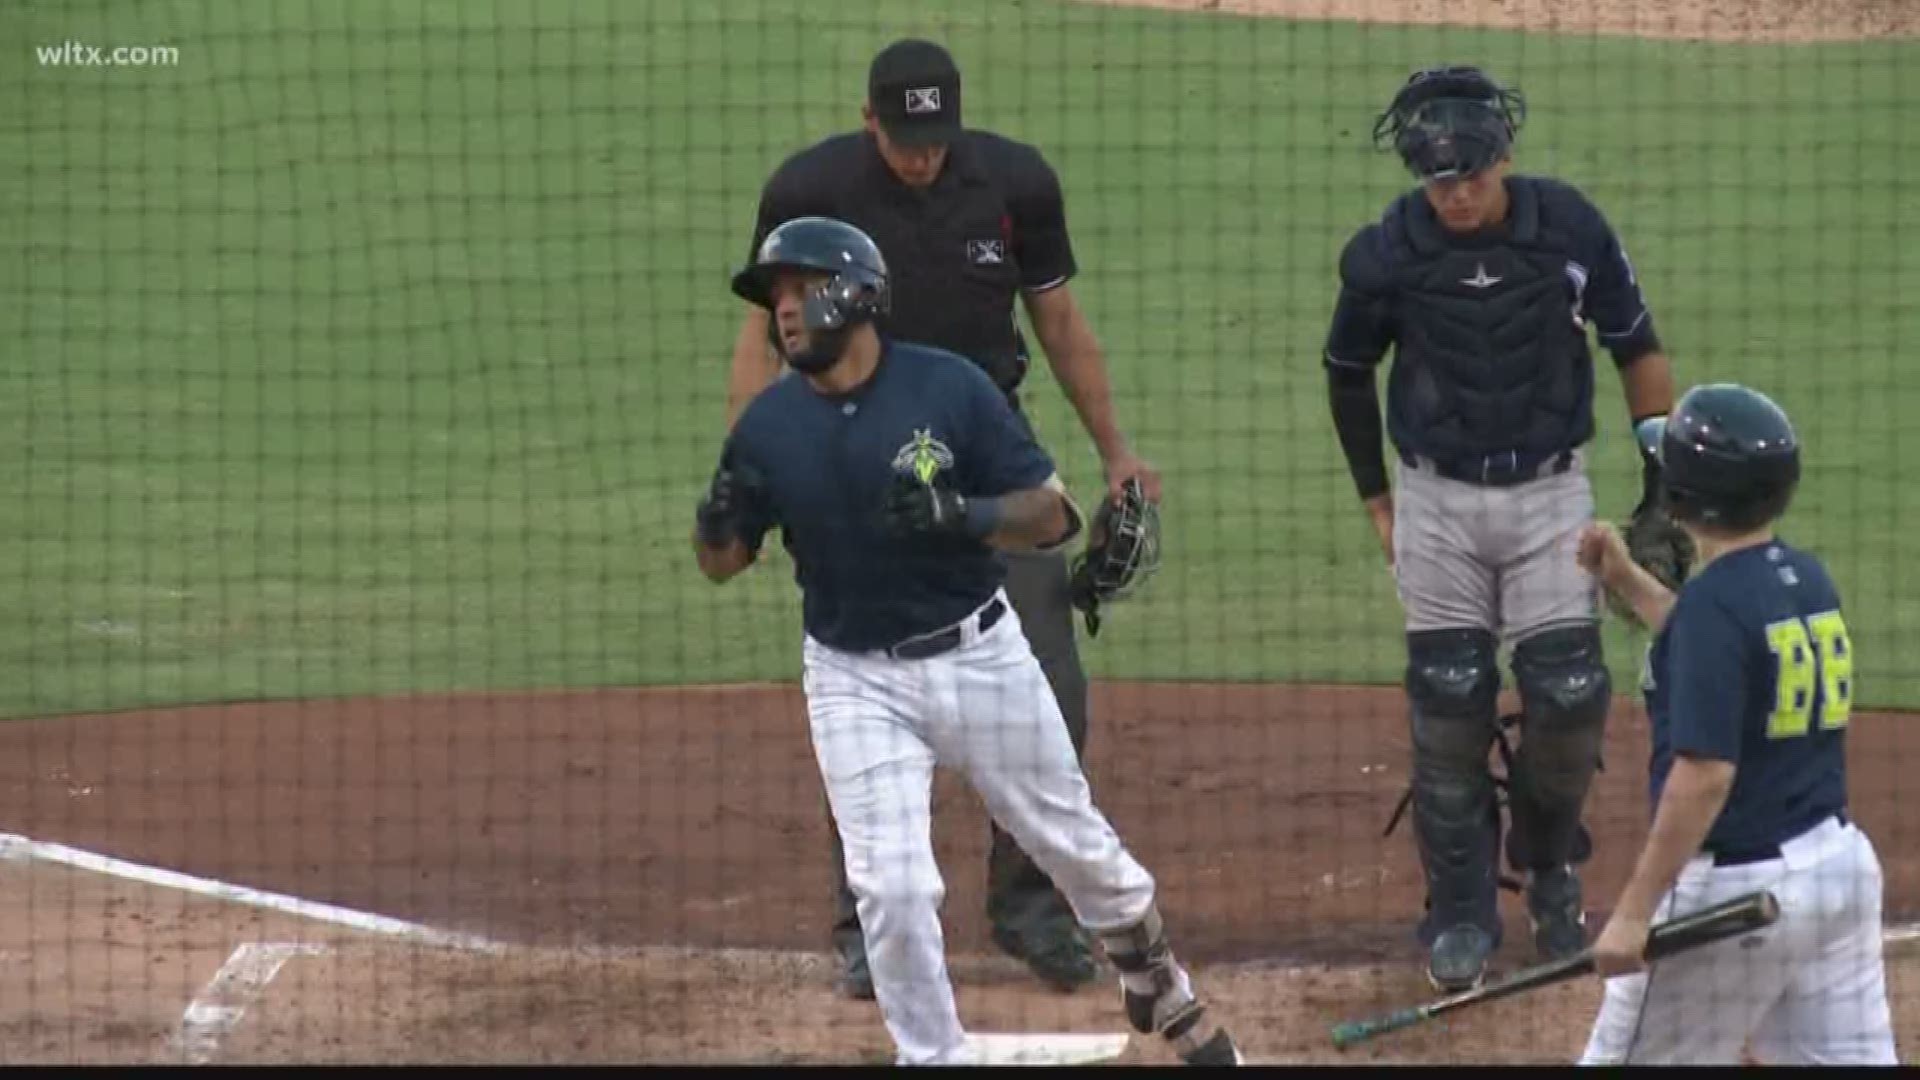 In spite of a season-high three home runs, the Columbia Fireflies dropped a 6-5 contest to the Charleston Riverdogs.